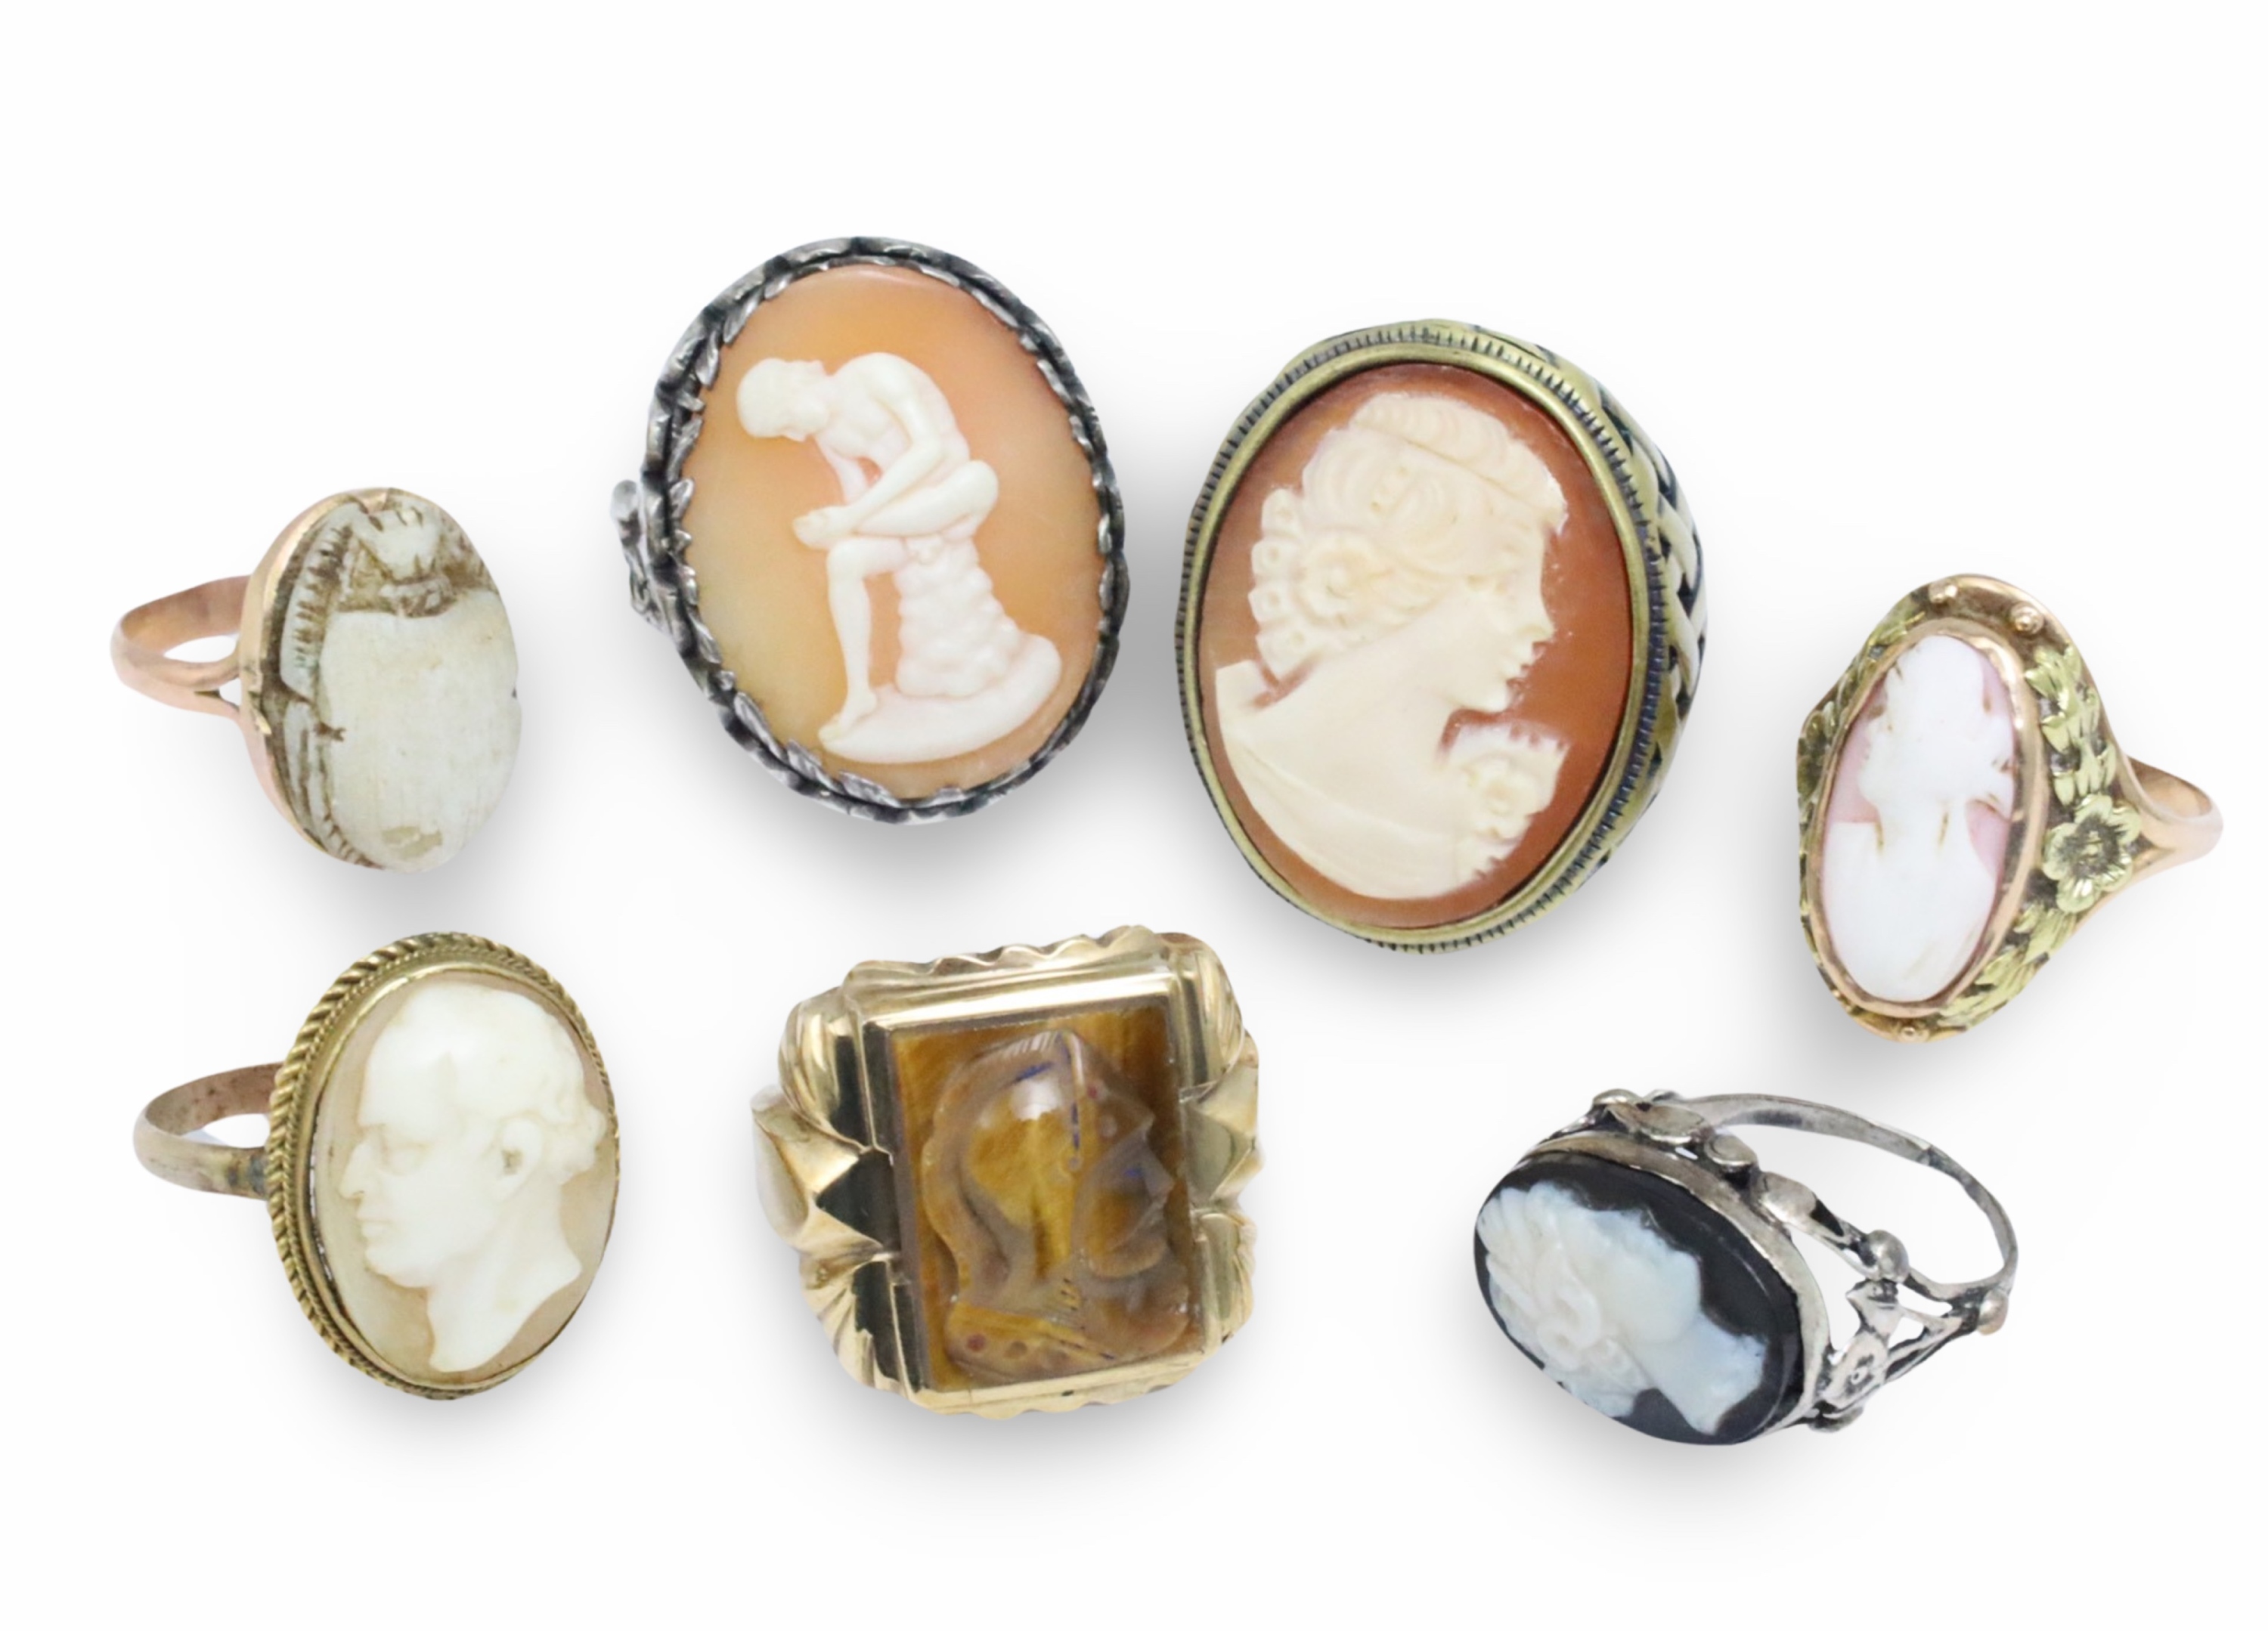 7 ANTIQUE CAMEO RINGS INCL 14K 3ccb24